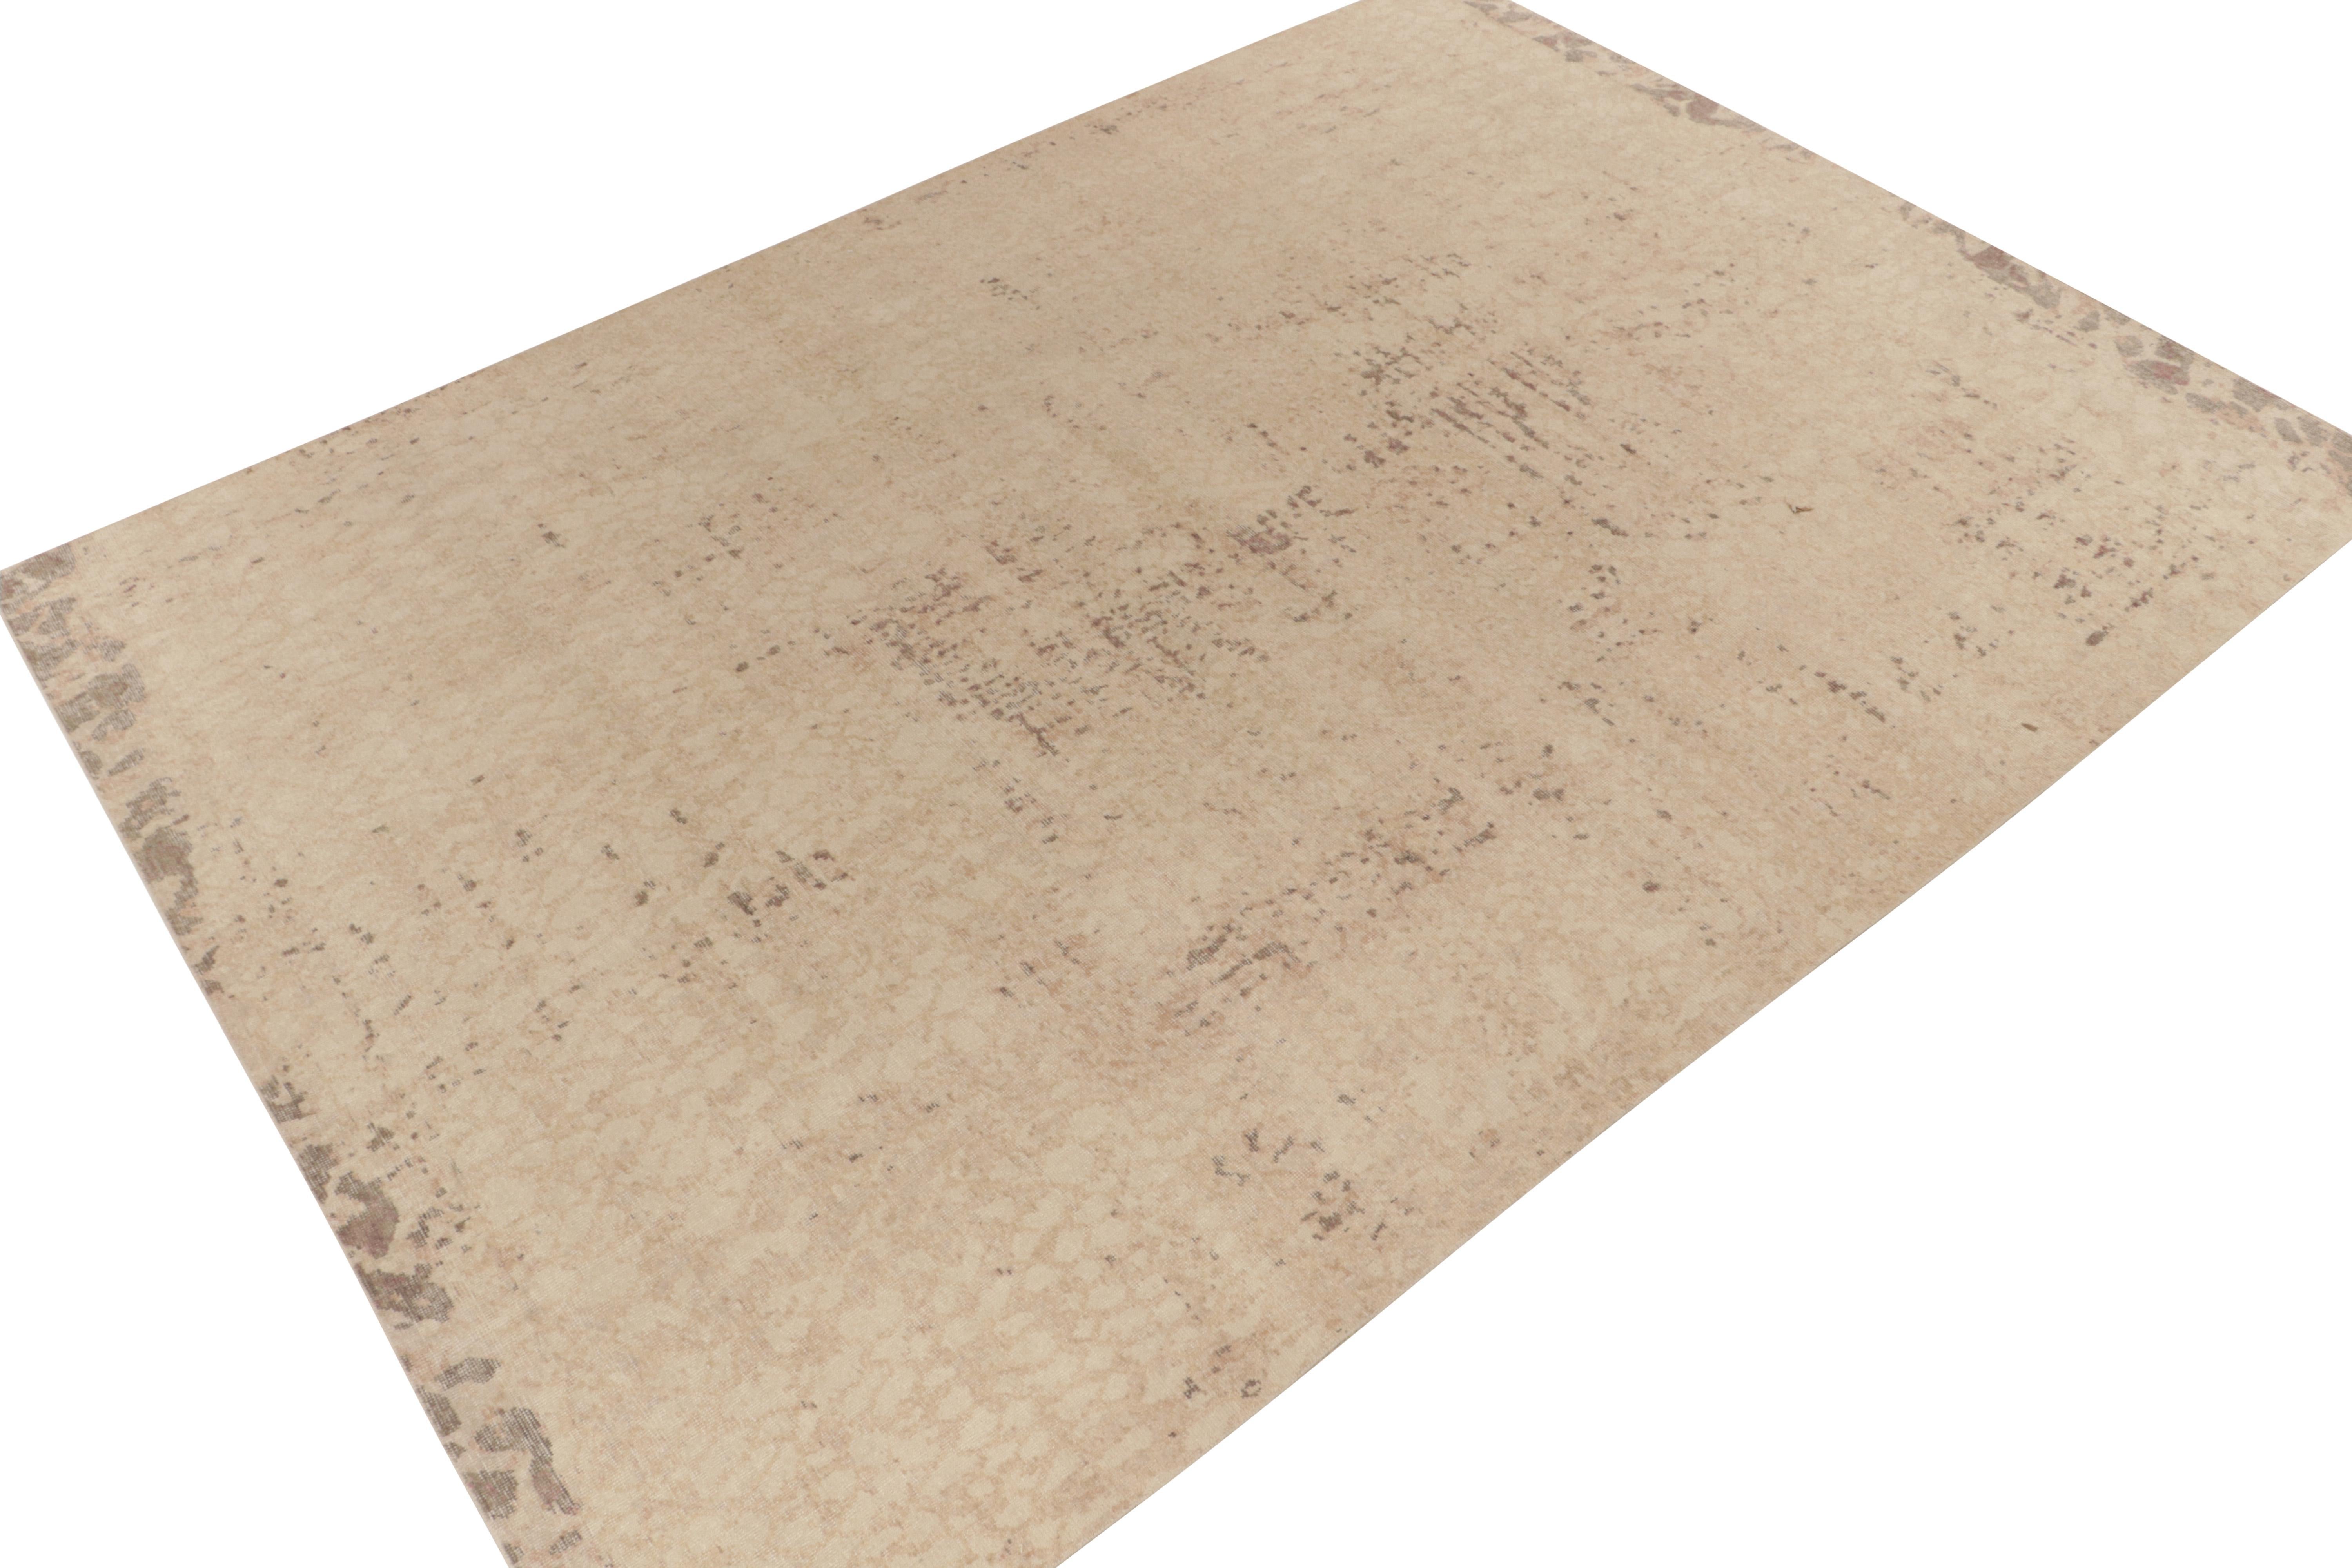 From Rug & Kilim’s Homage collection, a 10x14 distressed style abstract rug relishing a play of beige brown and subtle pink accents. 

Exemplifying the easy to maintain, comfortable wash achieving this textured low wool pile, an impeccable